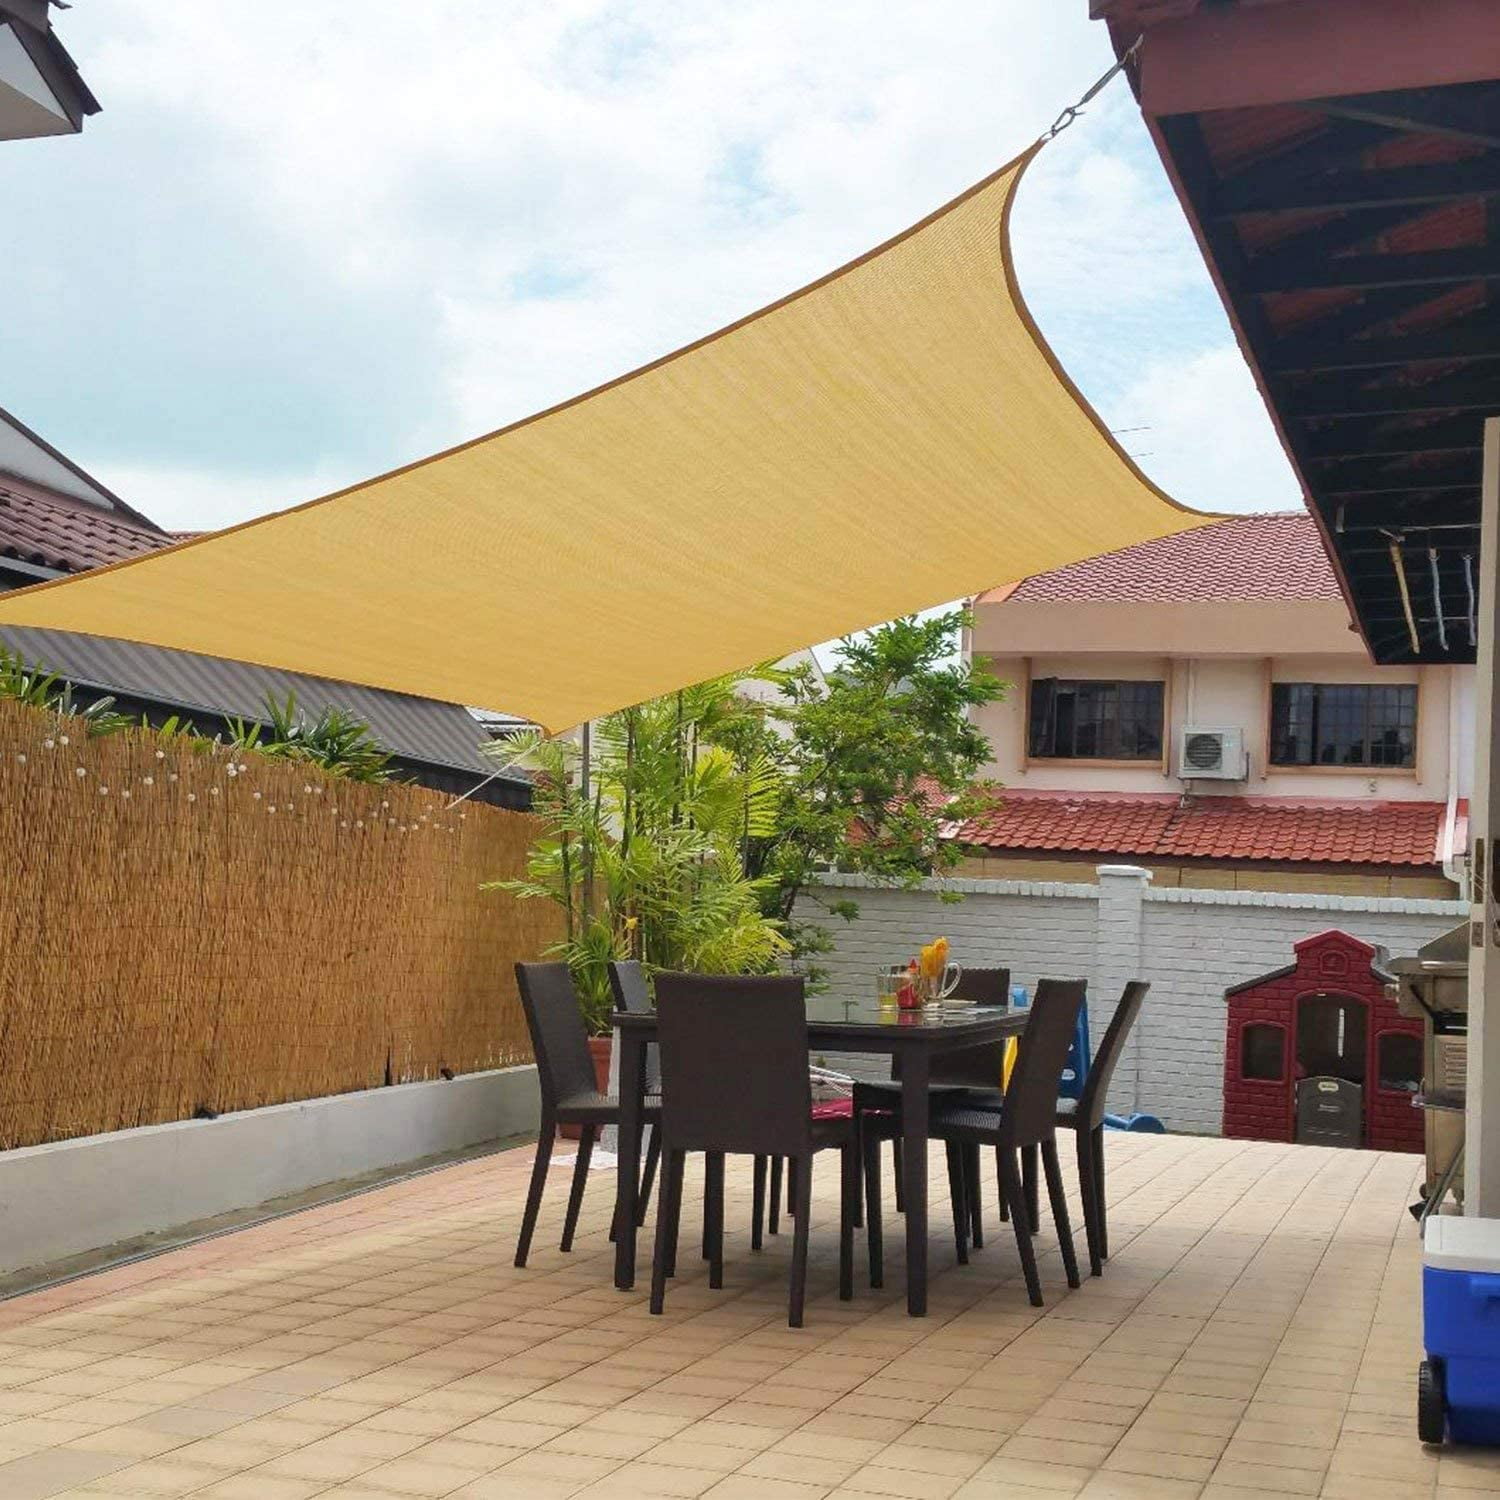 Shatex 12x16ft 90% Square Sun Shade Sai Shelter PatioTaped Edge W/ Gromme Wheat 